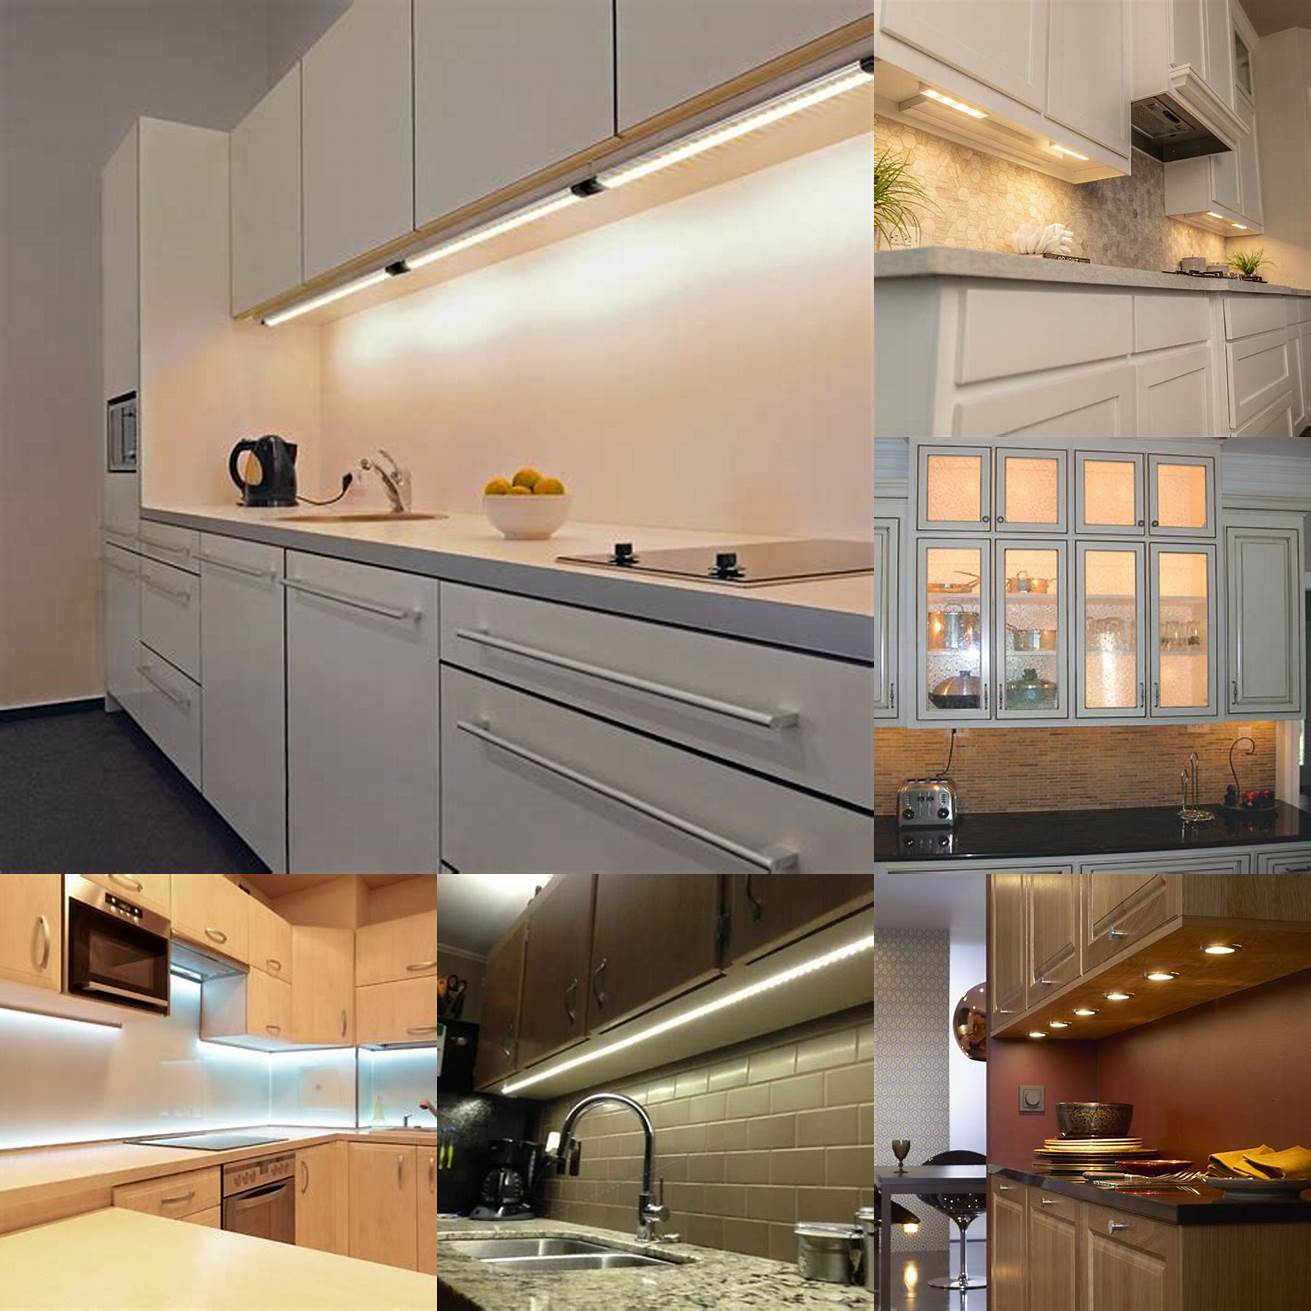 Under-cabinet lighting a practical and stylish choice